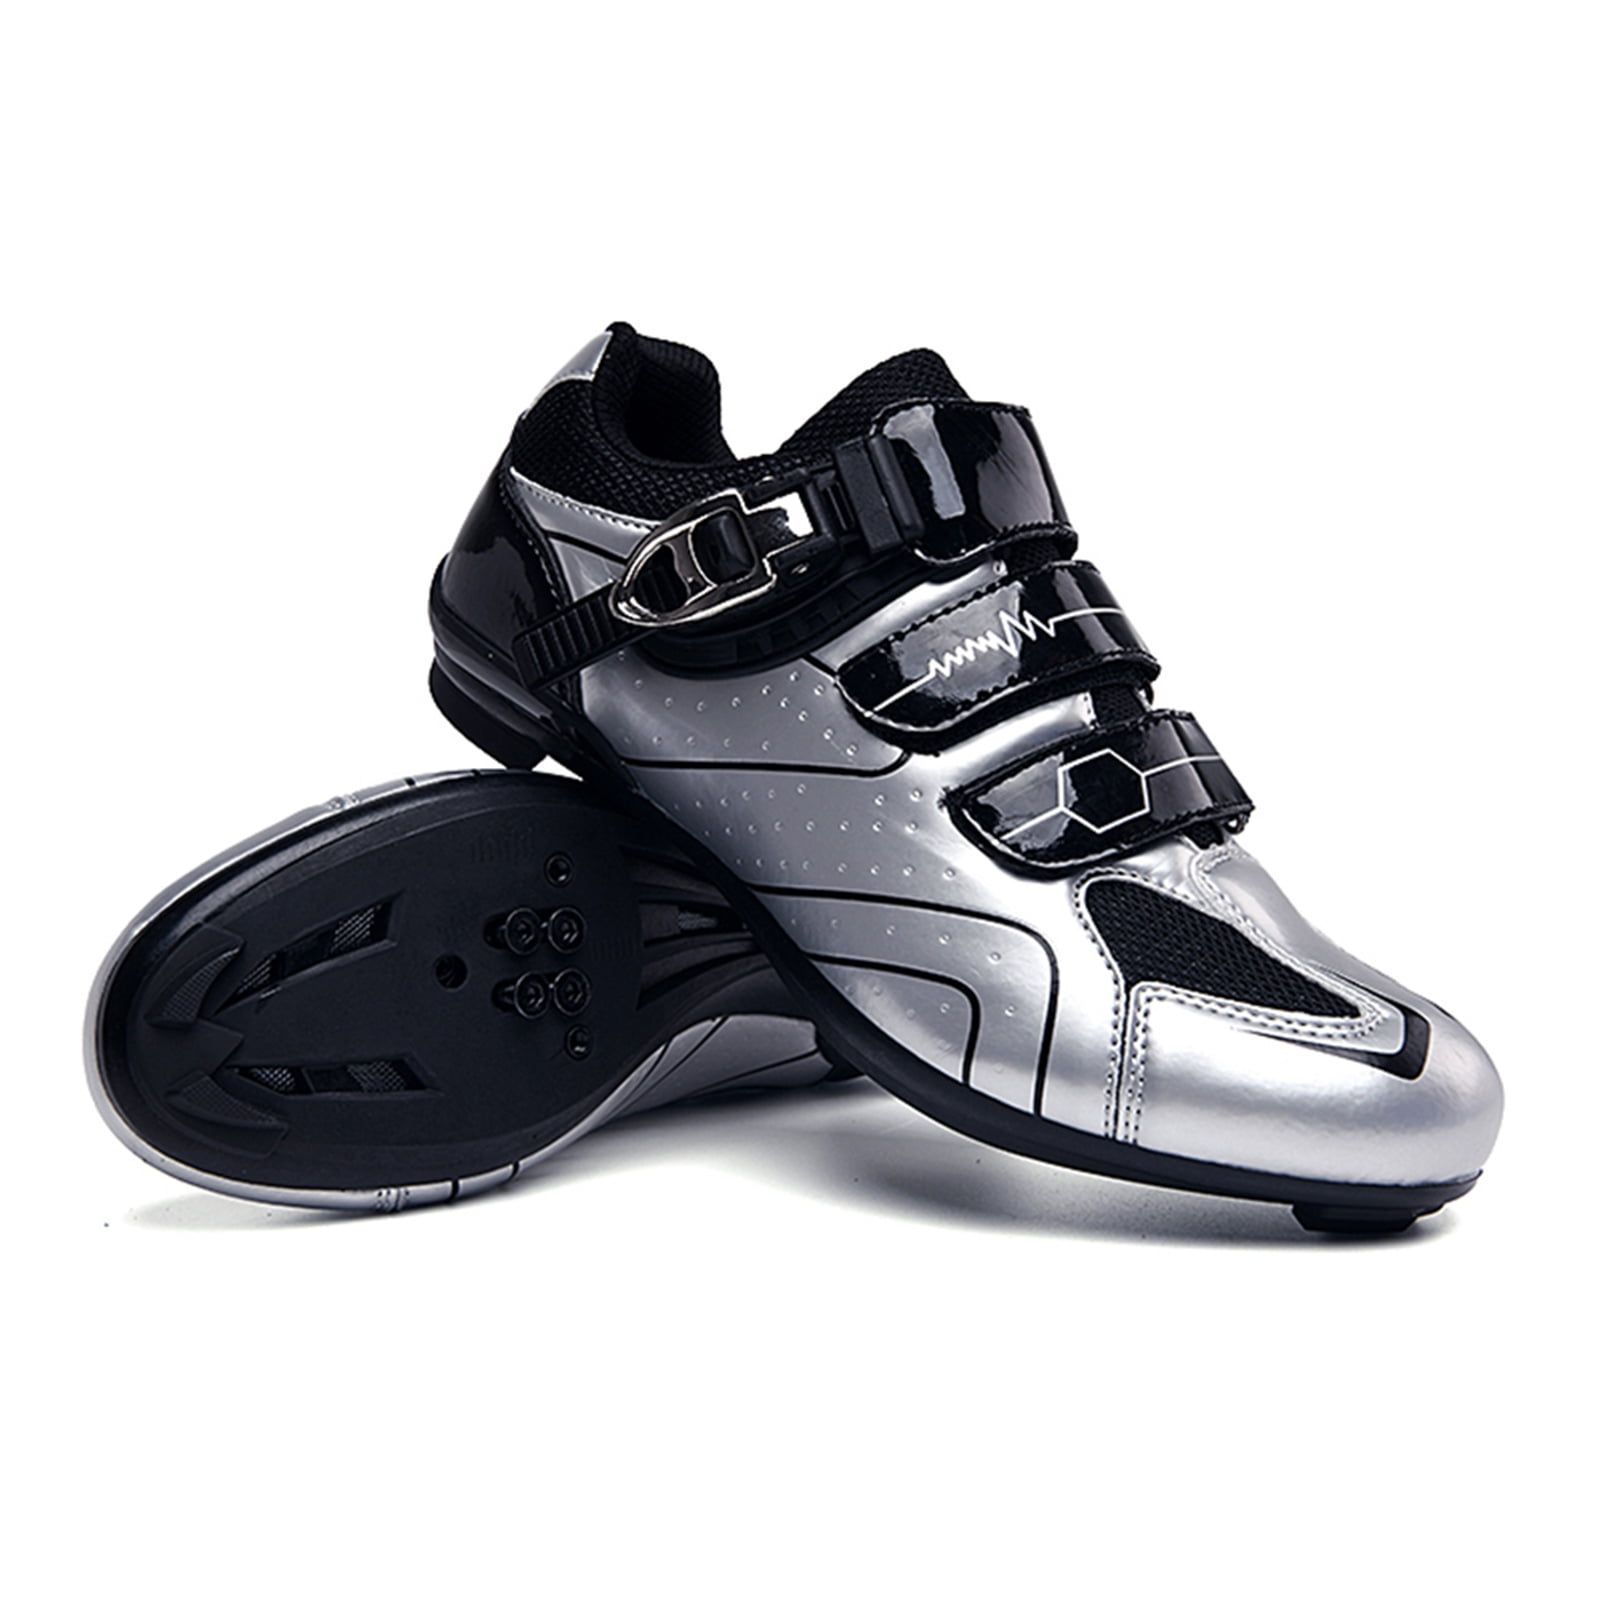 Details about   Men Professional Cycling Shoes Ultralight Bike Racing Road Sneakers Durable Spin 